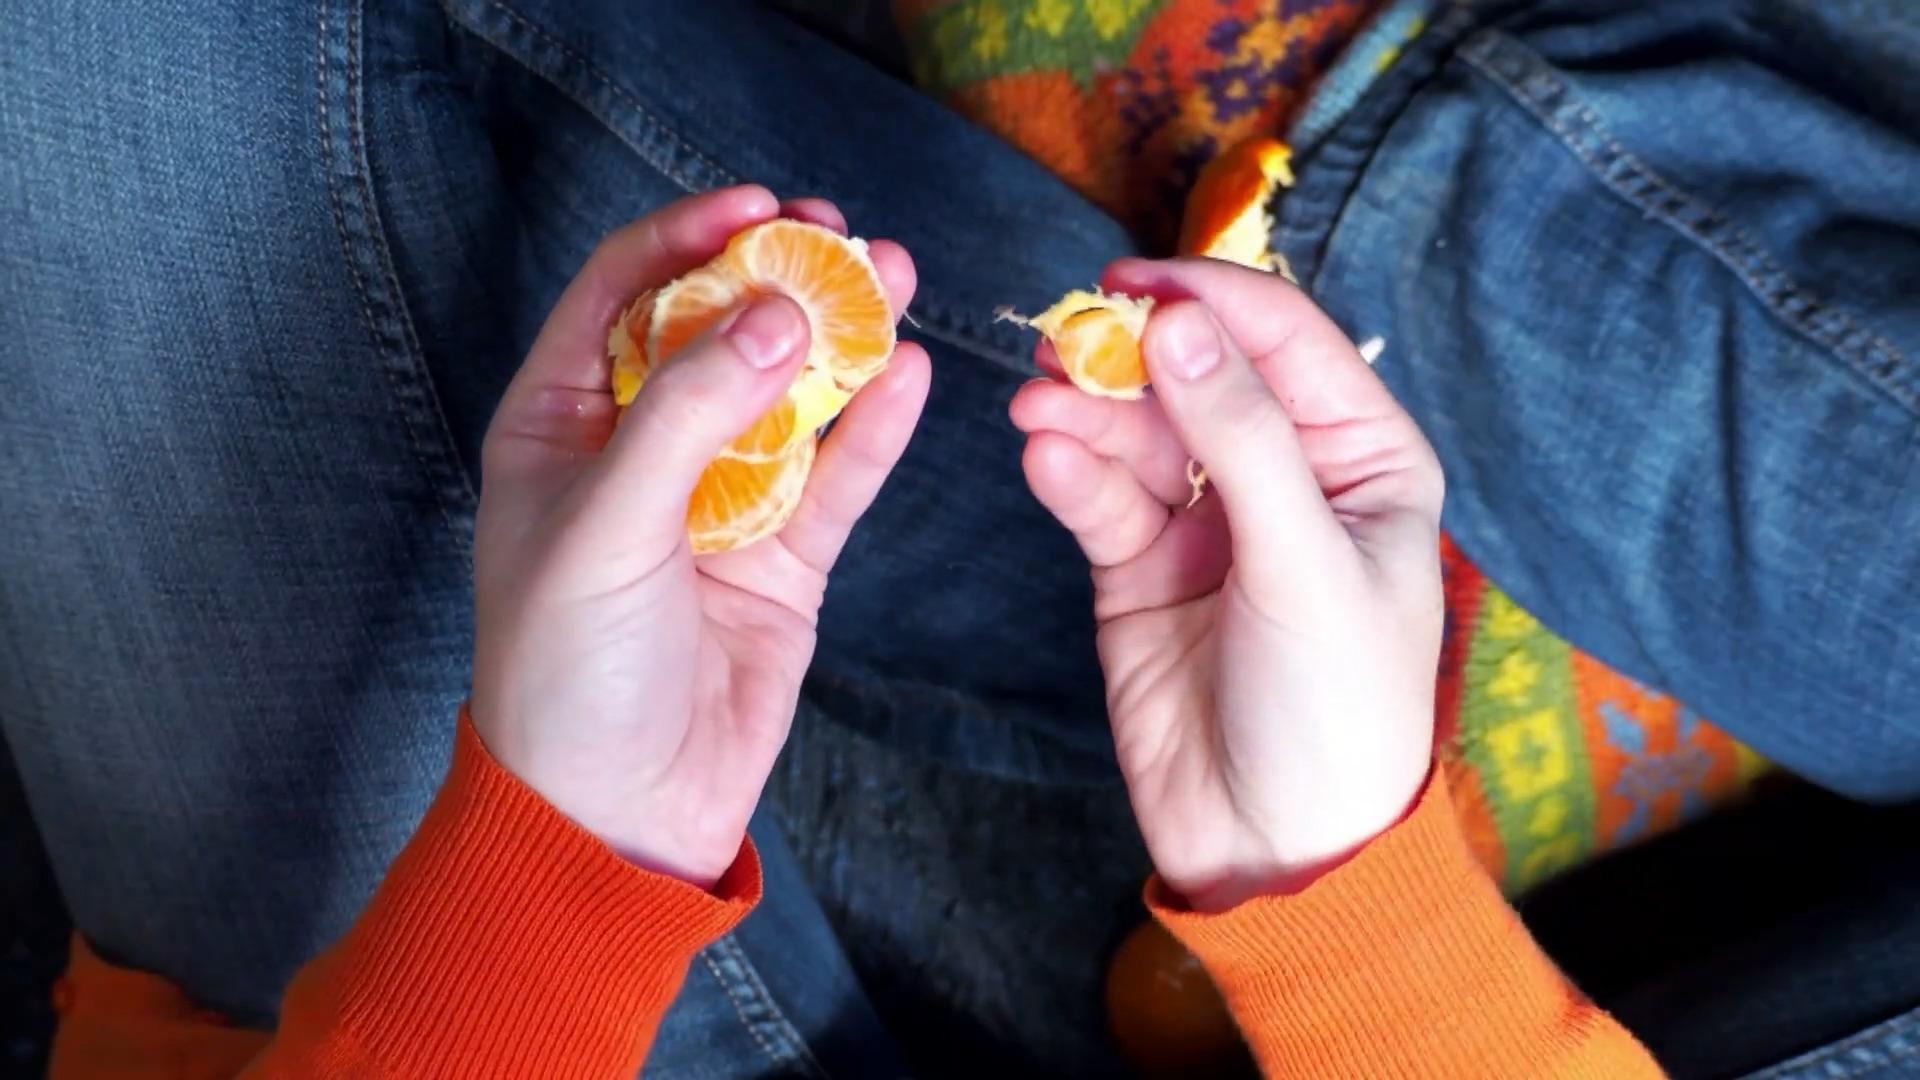 Peel tangerines with this trick No more smelly fingers